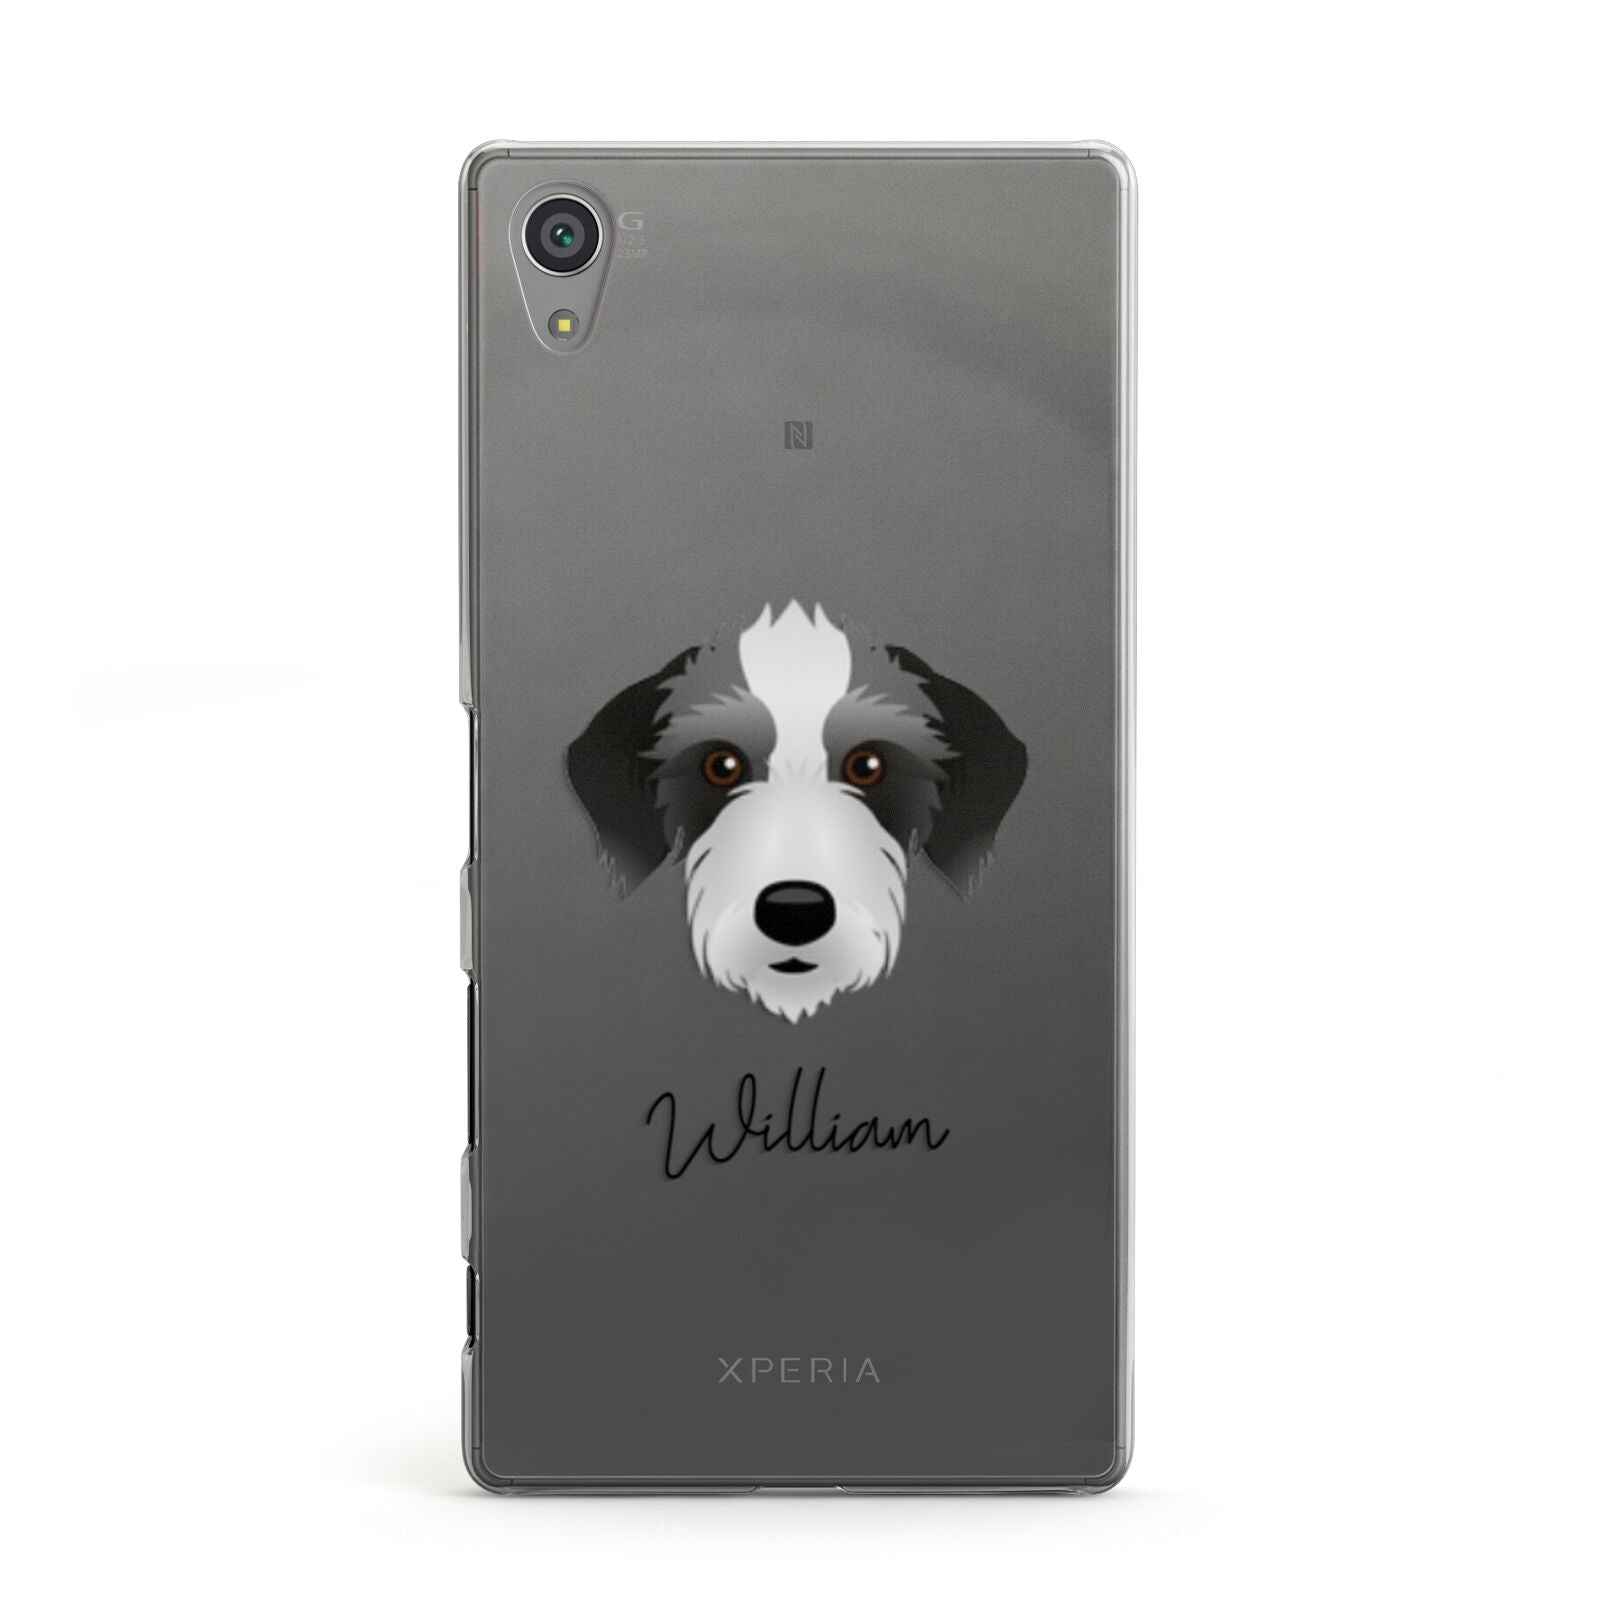 Bedlington Whippet Personalised Sony Xperia Case